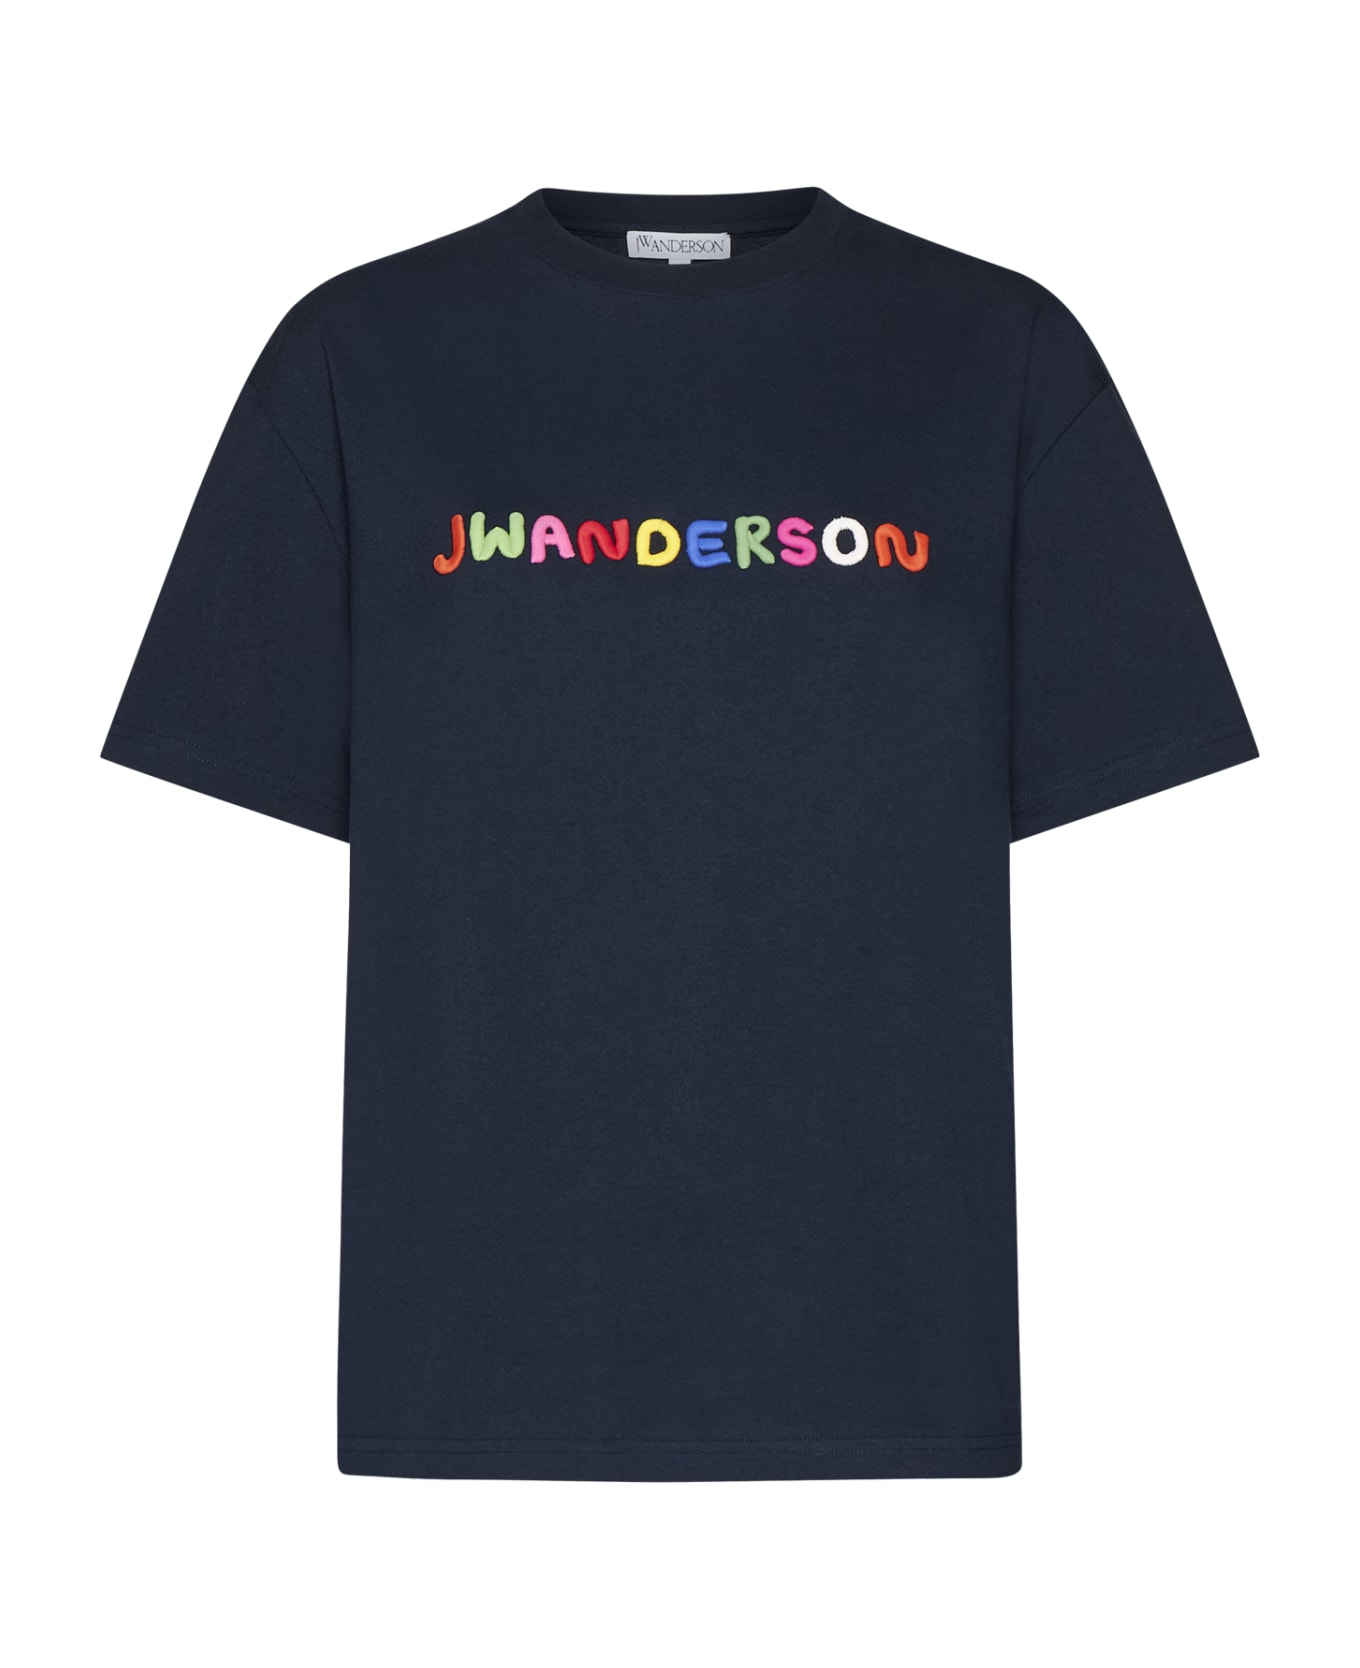 J.W. Anderson T-Shirt - Navy Tシャツ